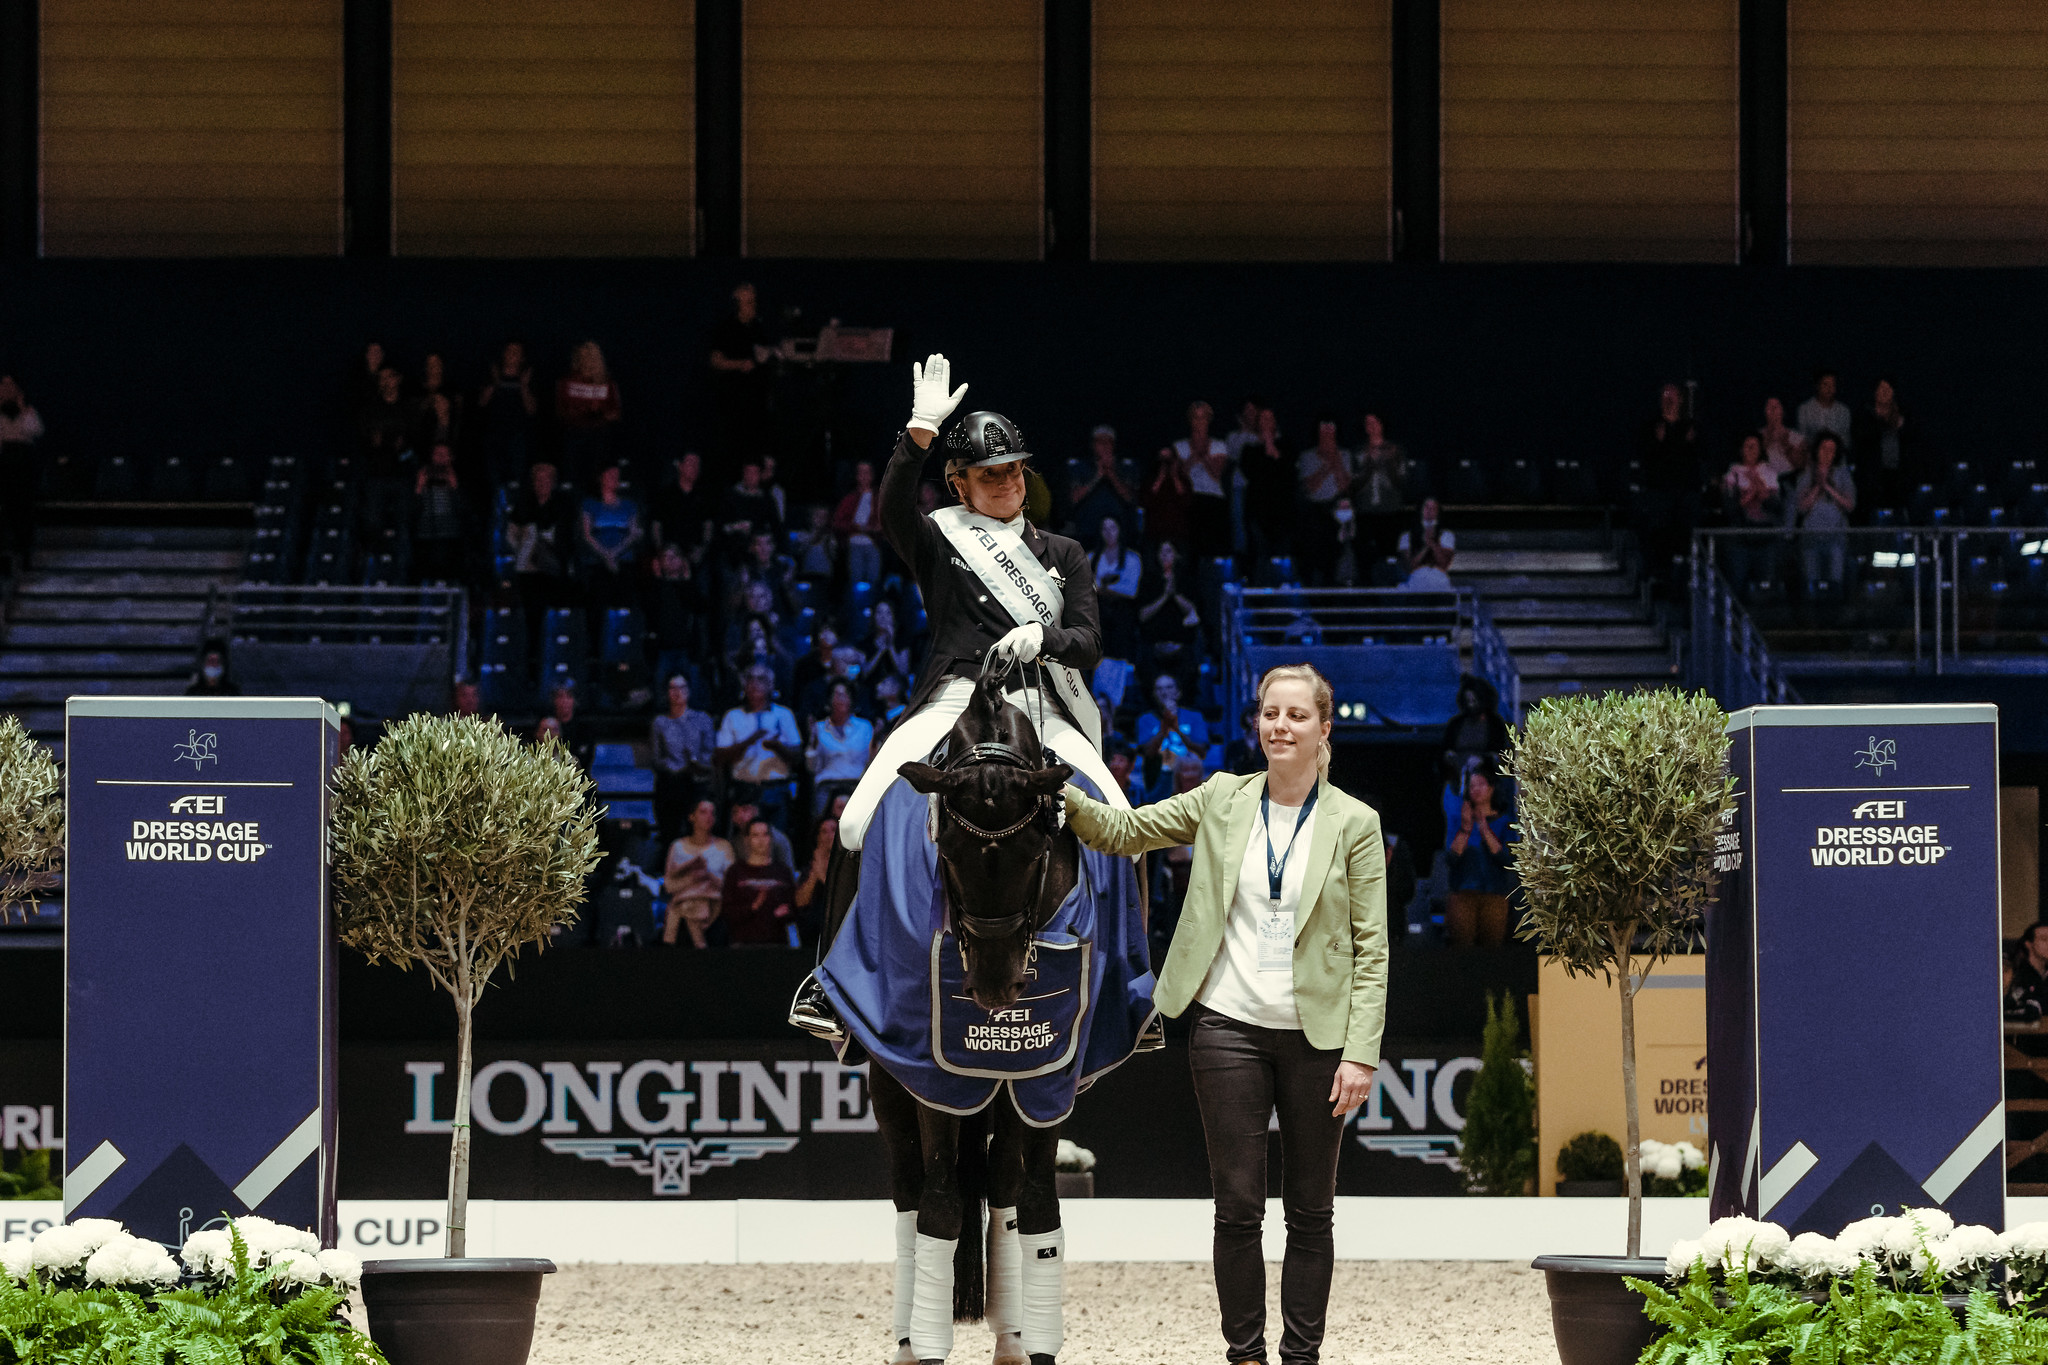 FEI Dressage World Cup™ Grand Prix Freestyle presented by FFE GENERALI 511 - Isabell Werth ride Weihegold Old - GER